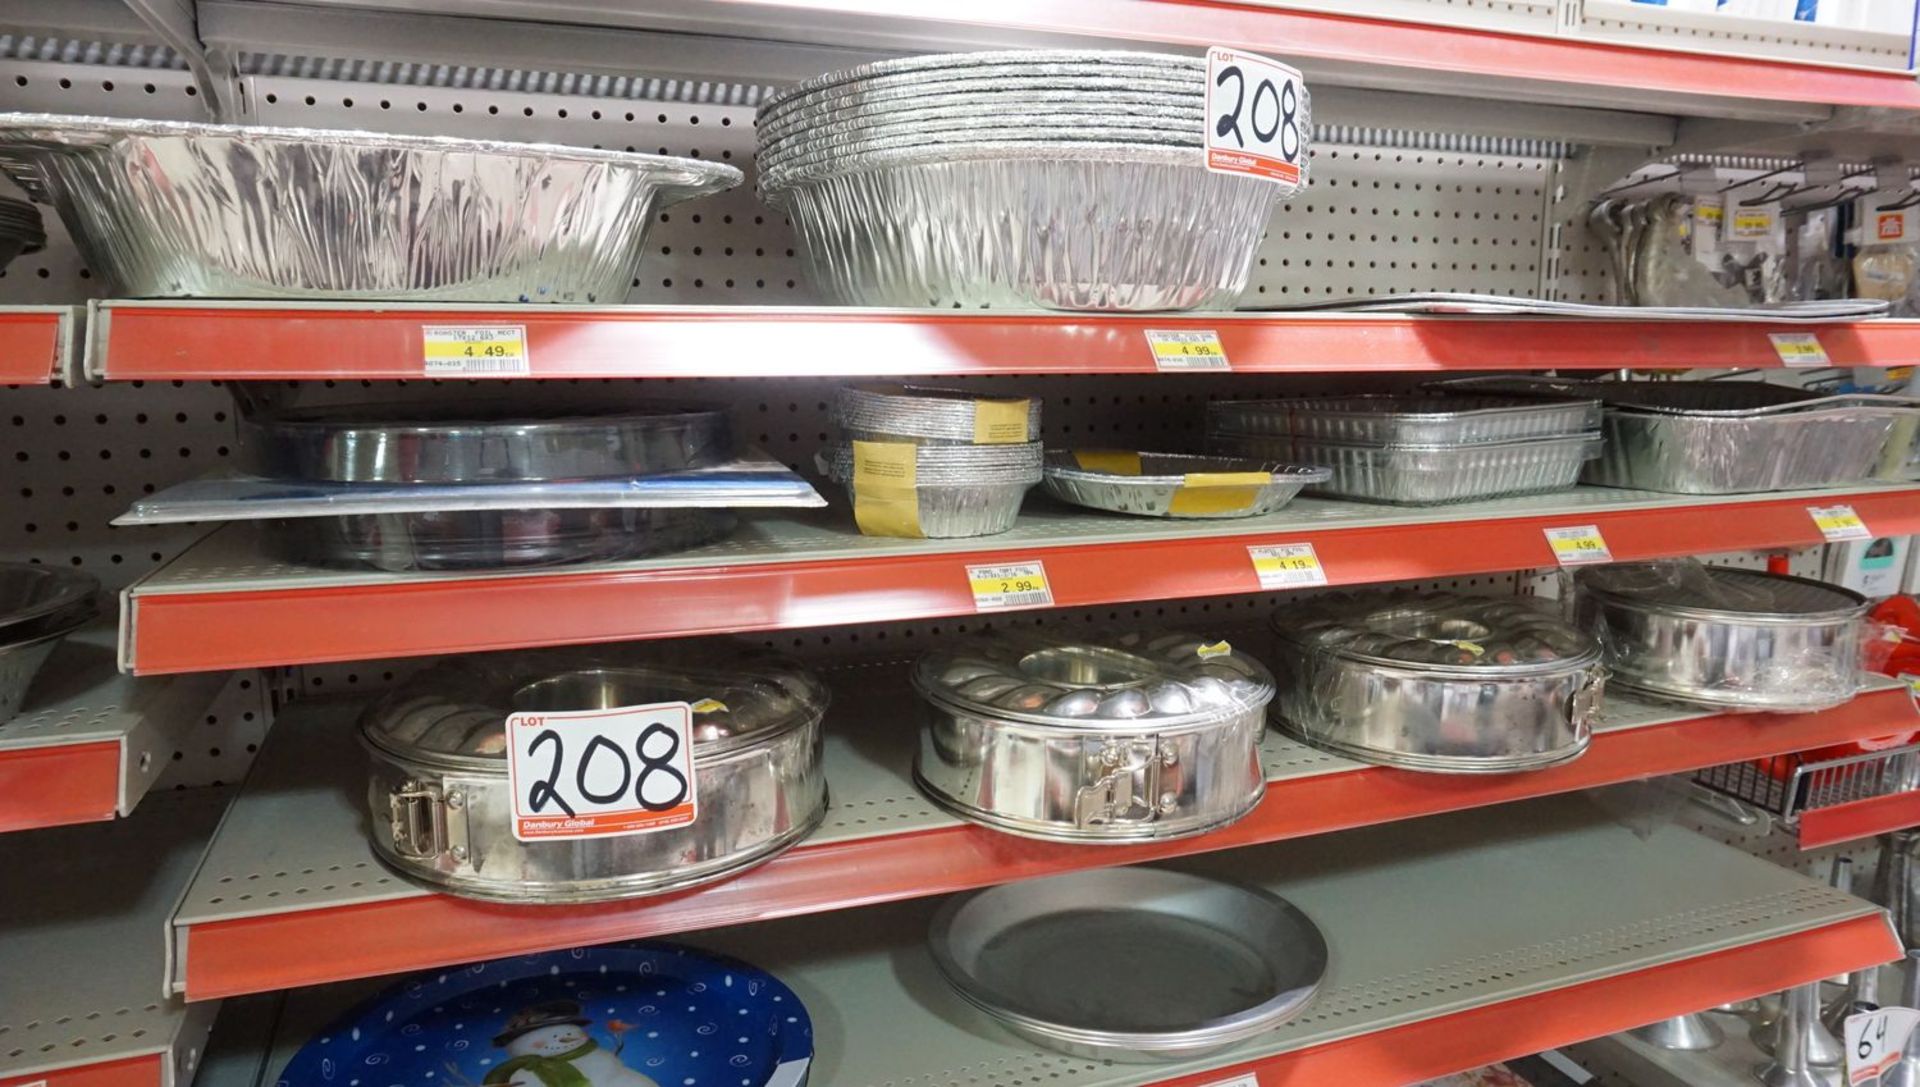 LOT - ASSTD MIXING BOWLS & BAKING ACCESSORIES - Image 3 of 4